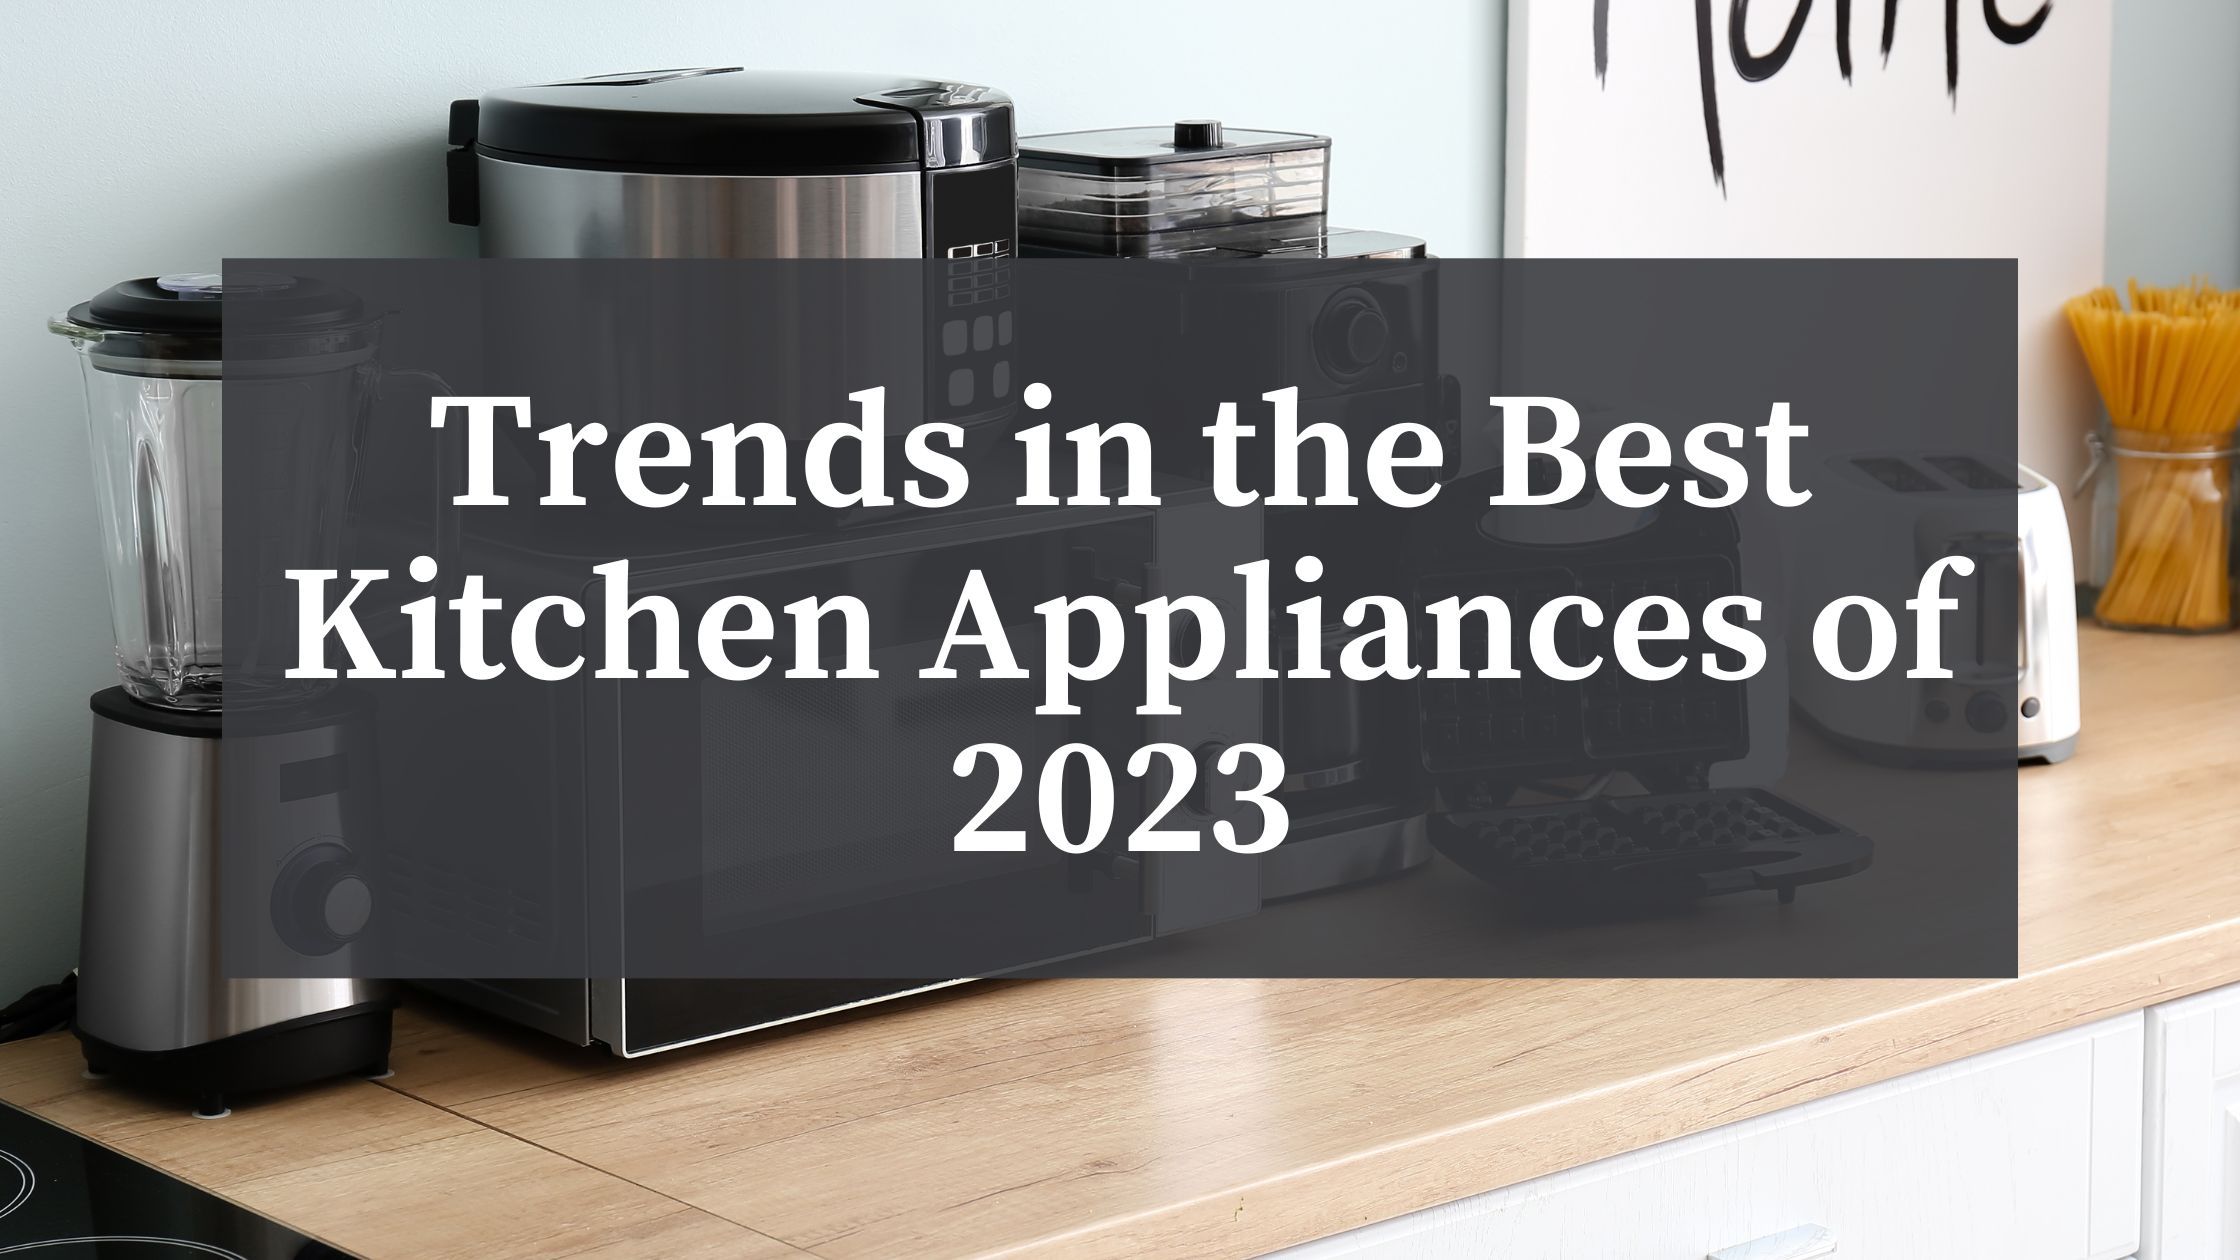 https://blog.bscculinary.com/wp-content/uploads/2023/07/Trends-in-the-Best-Kitchen-Appliances-of-2023-BSC.jpg